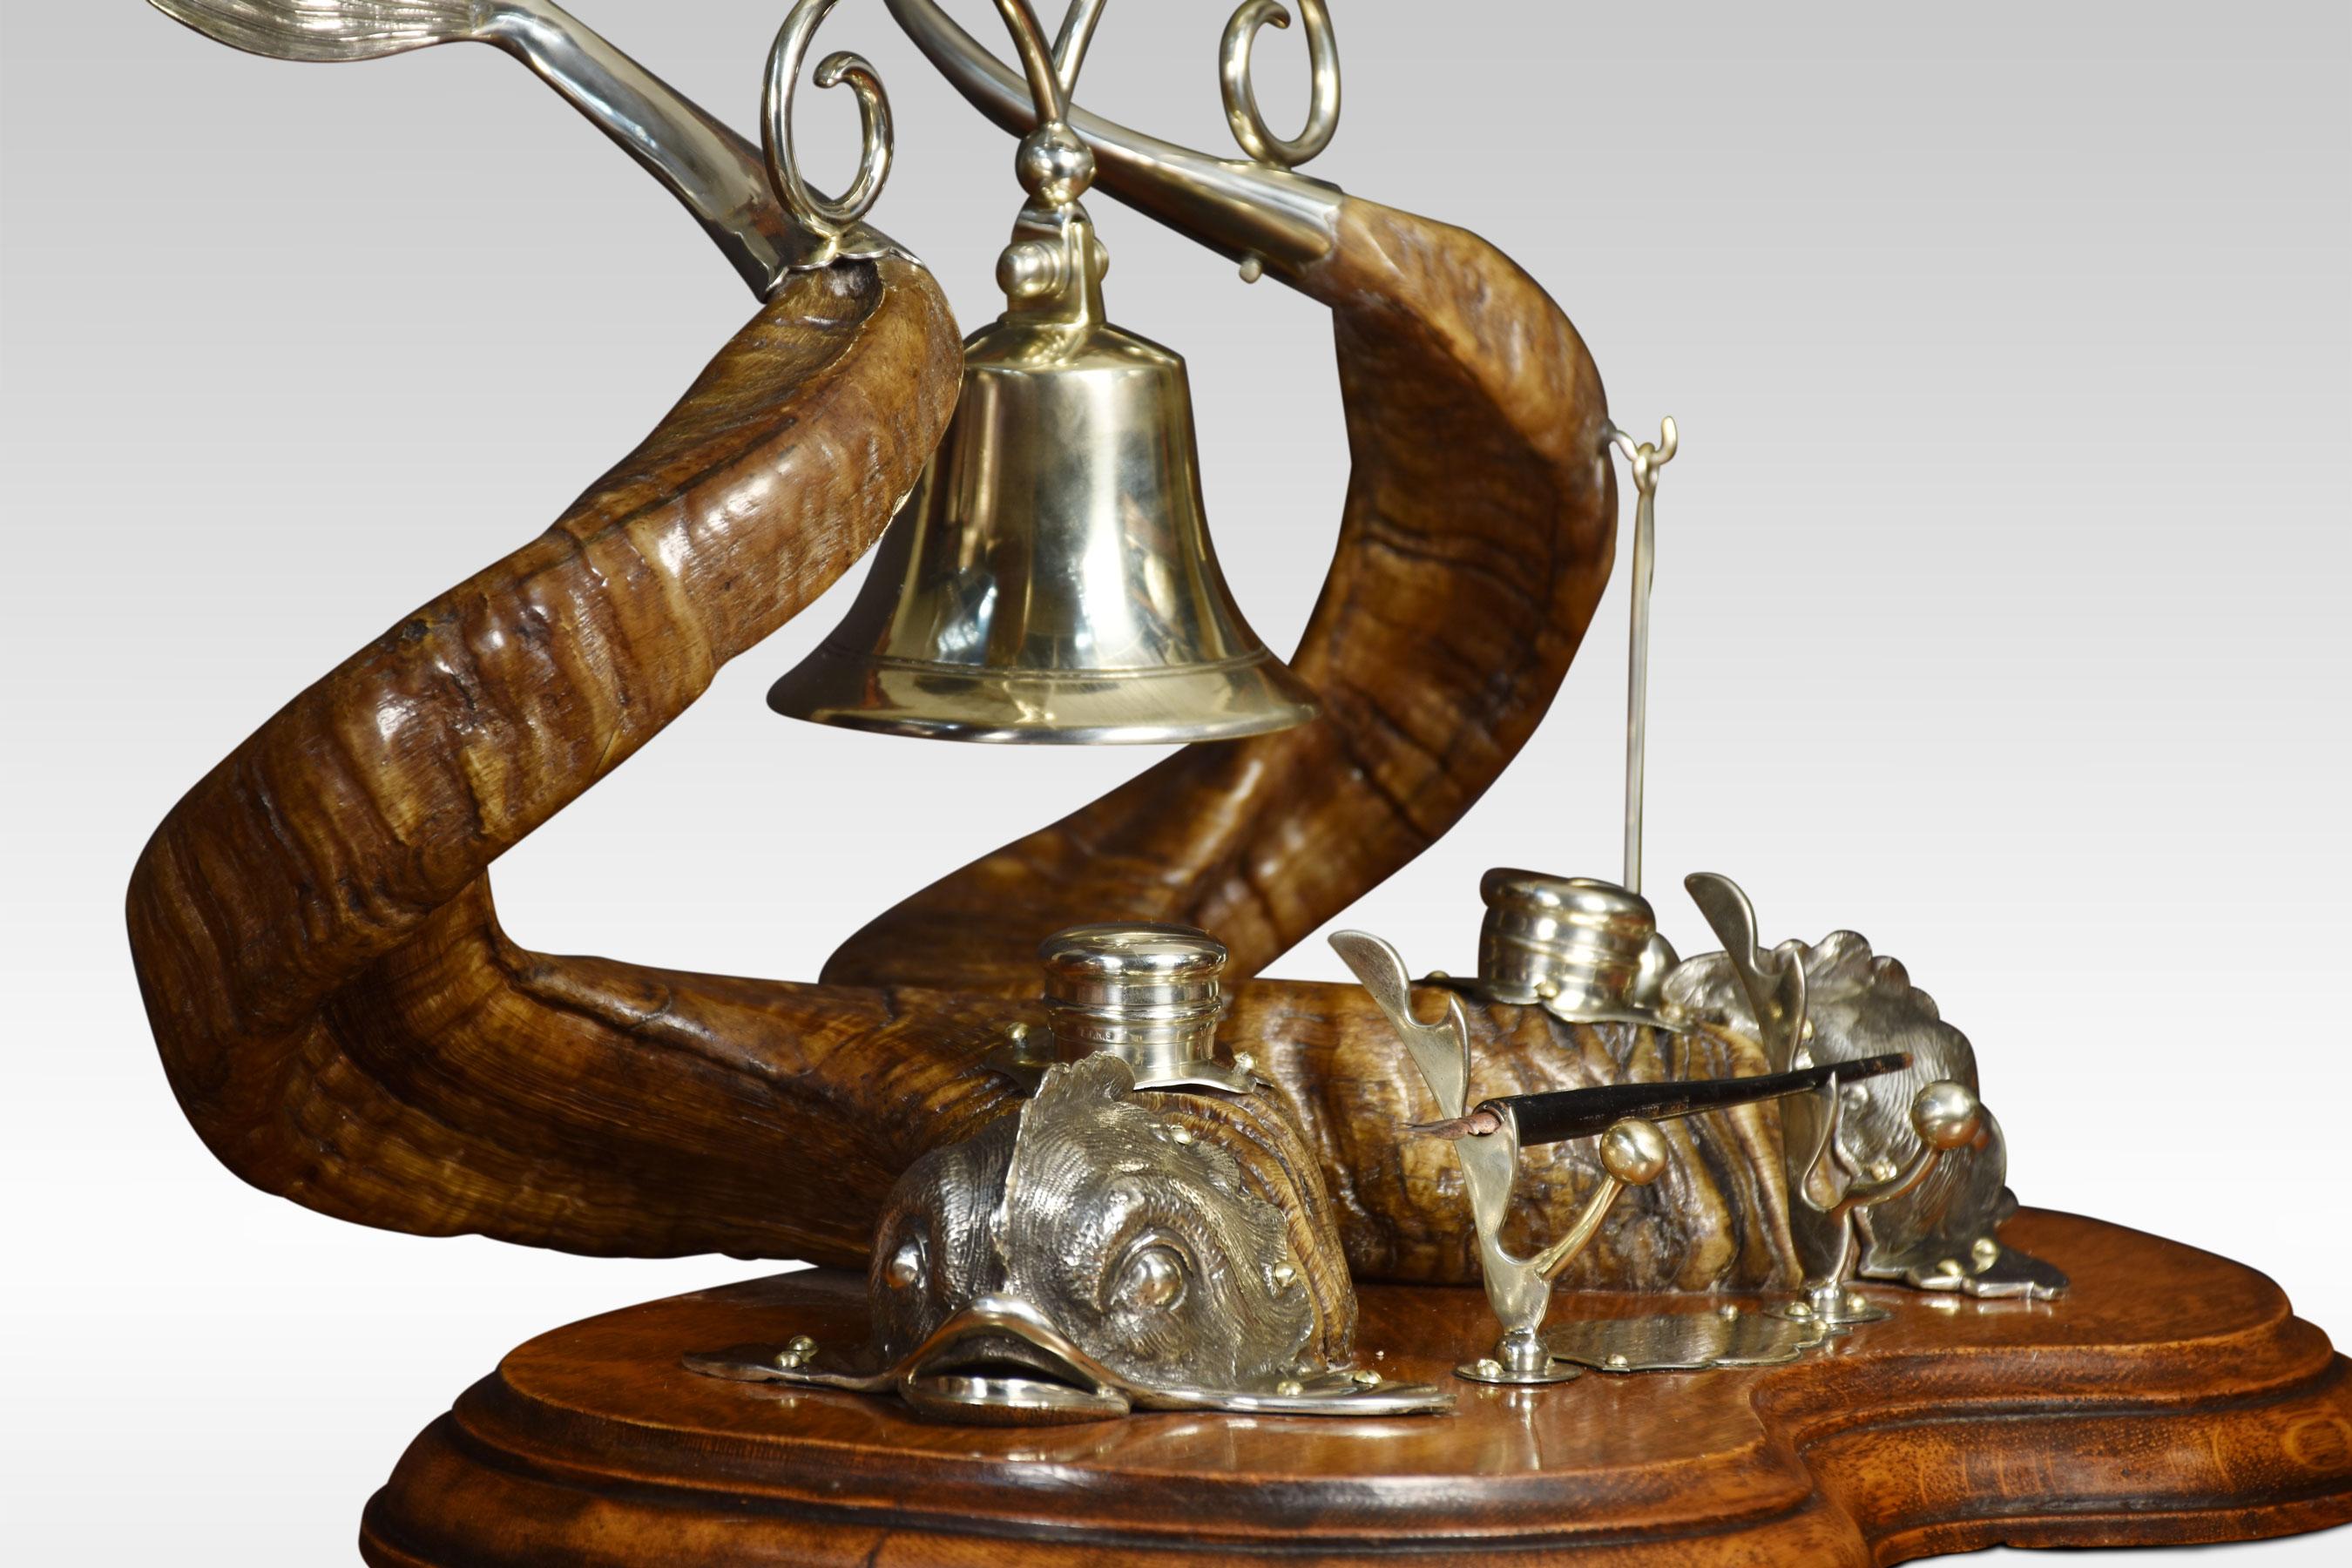 Ram horn and silver plate dolphin inkwell, bearing a pair of ram’s horns, mounted with plated dolphin mounts, the tail suspending a bell, the beater for which is on mounts to the front near the pen well. All raised up on oak base
Dimensions
Height